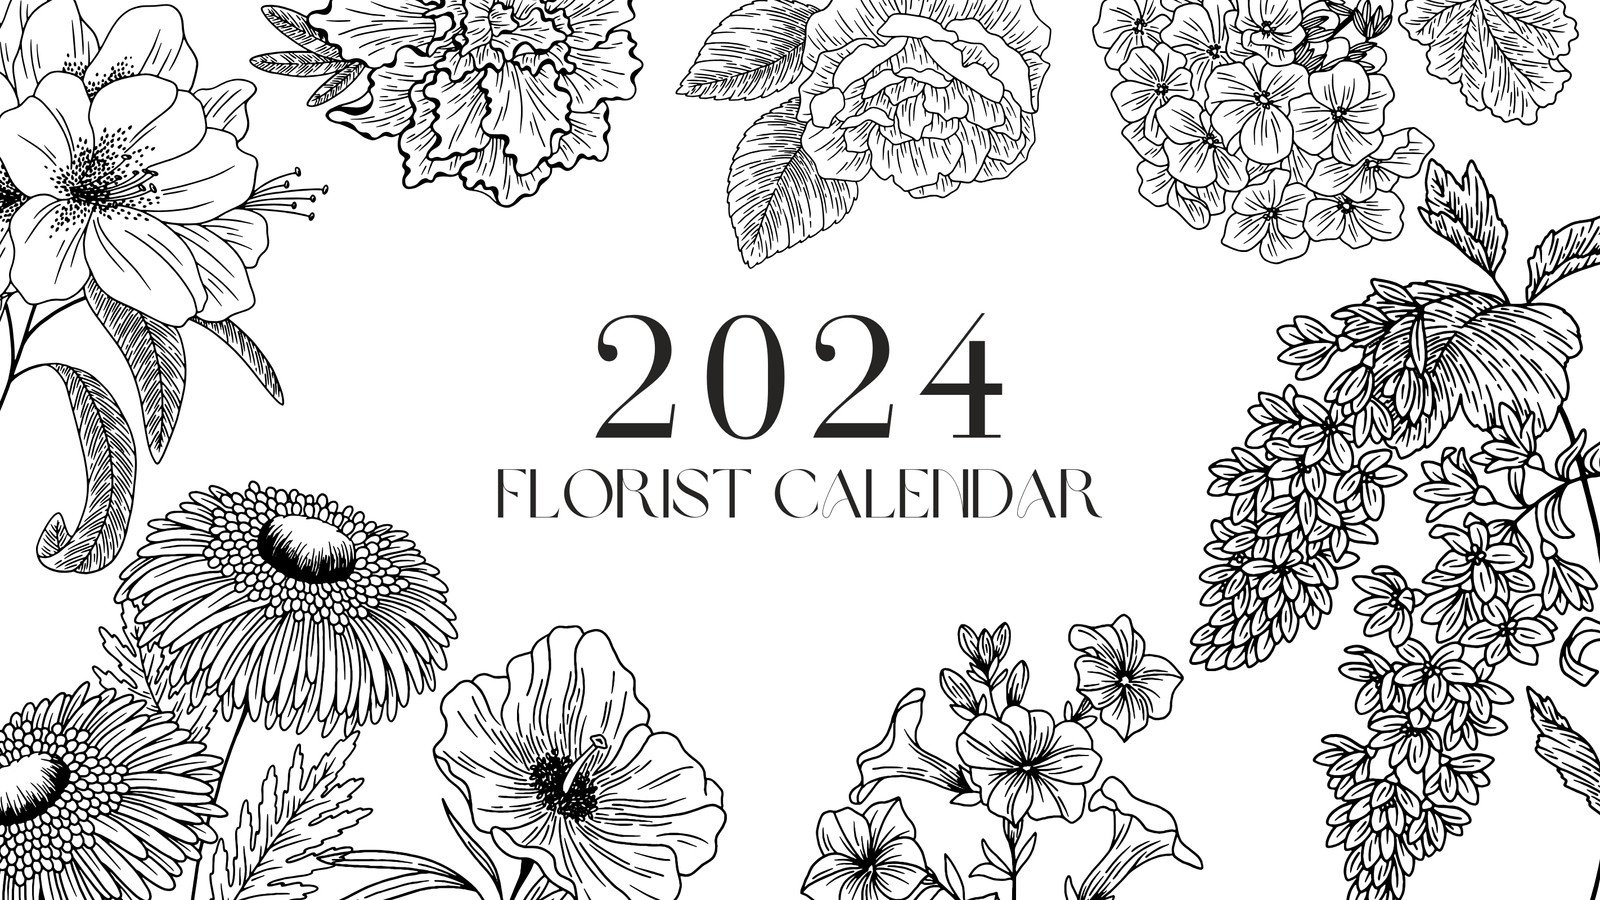 Free And Customizable Calendar Templates | Canva for Free Printable Black And White Calendar 2024